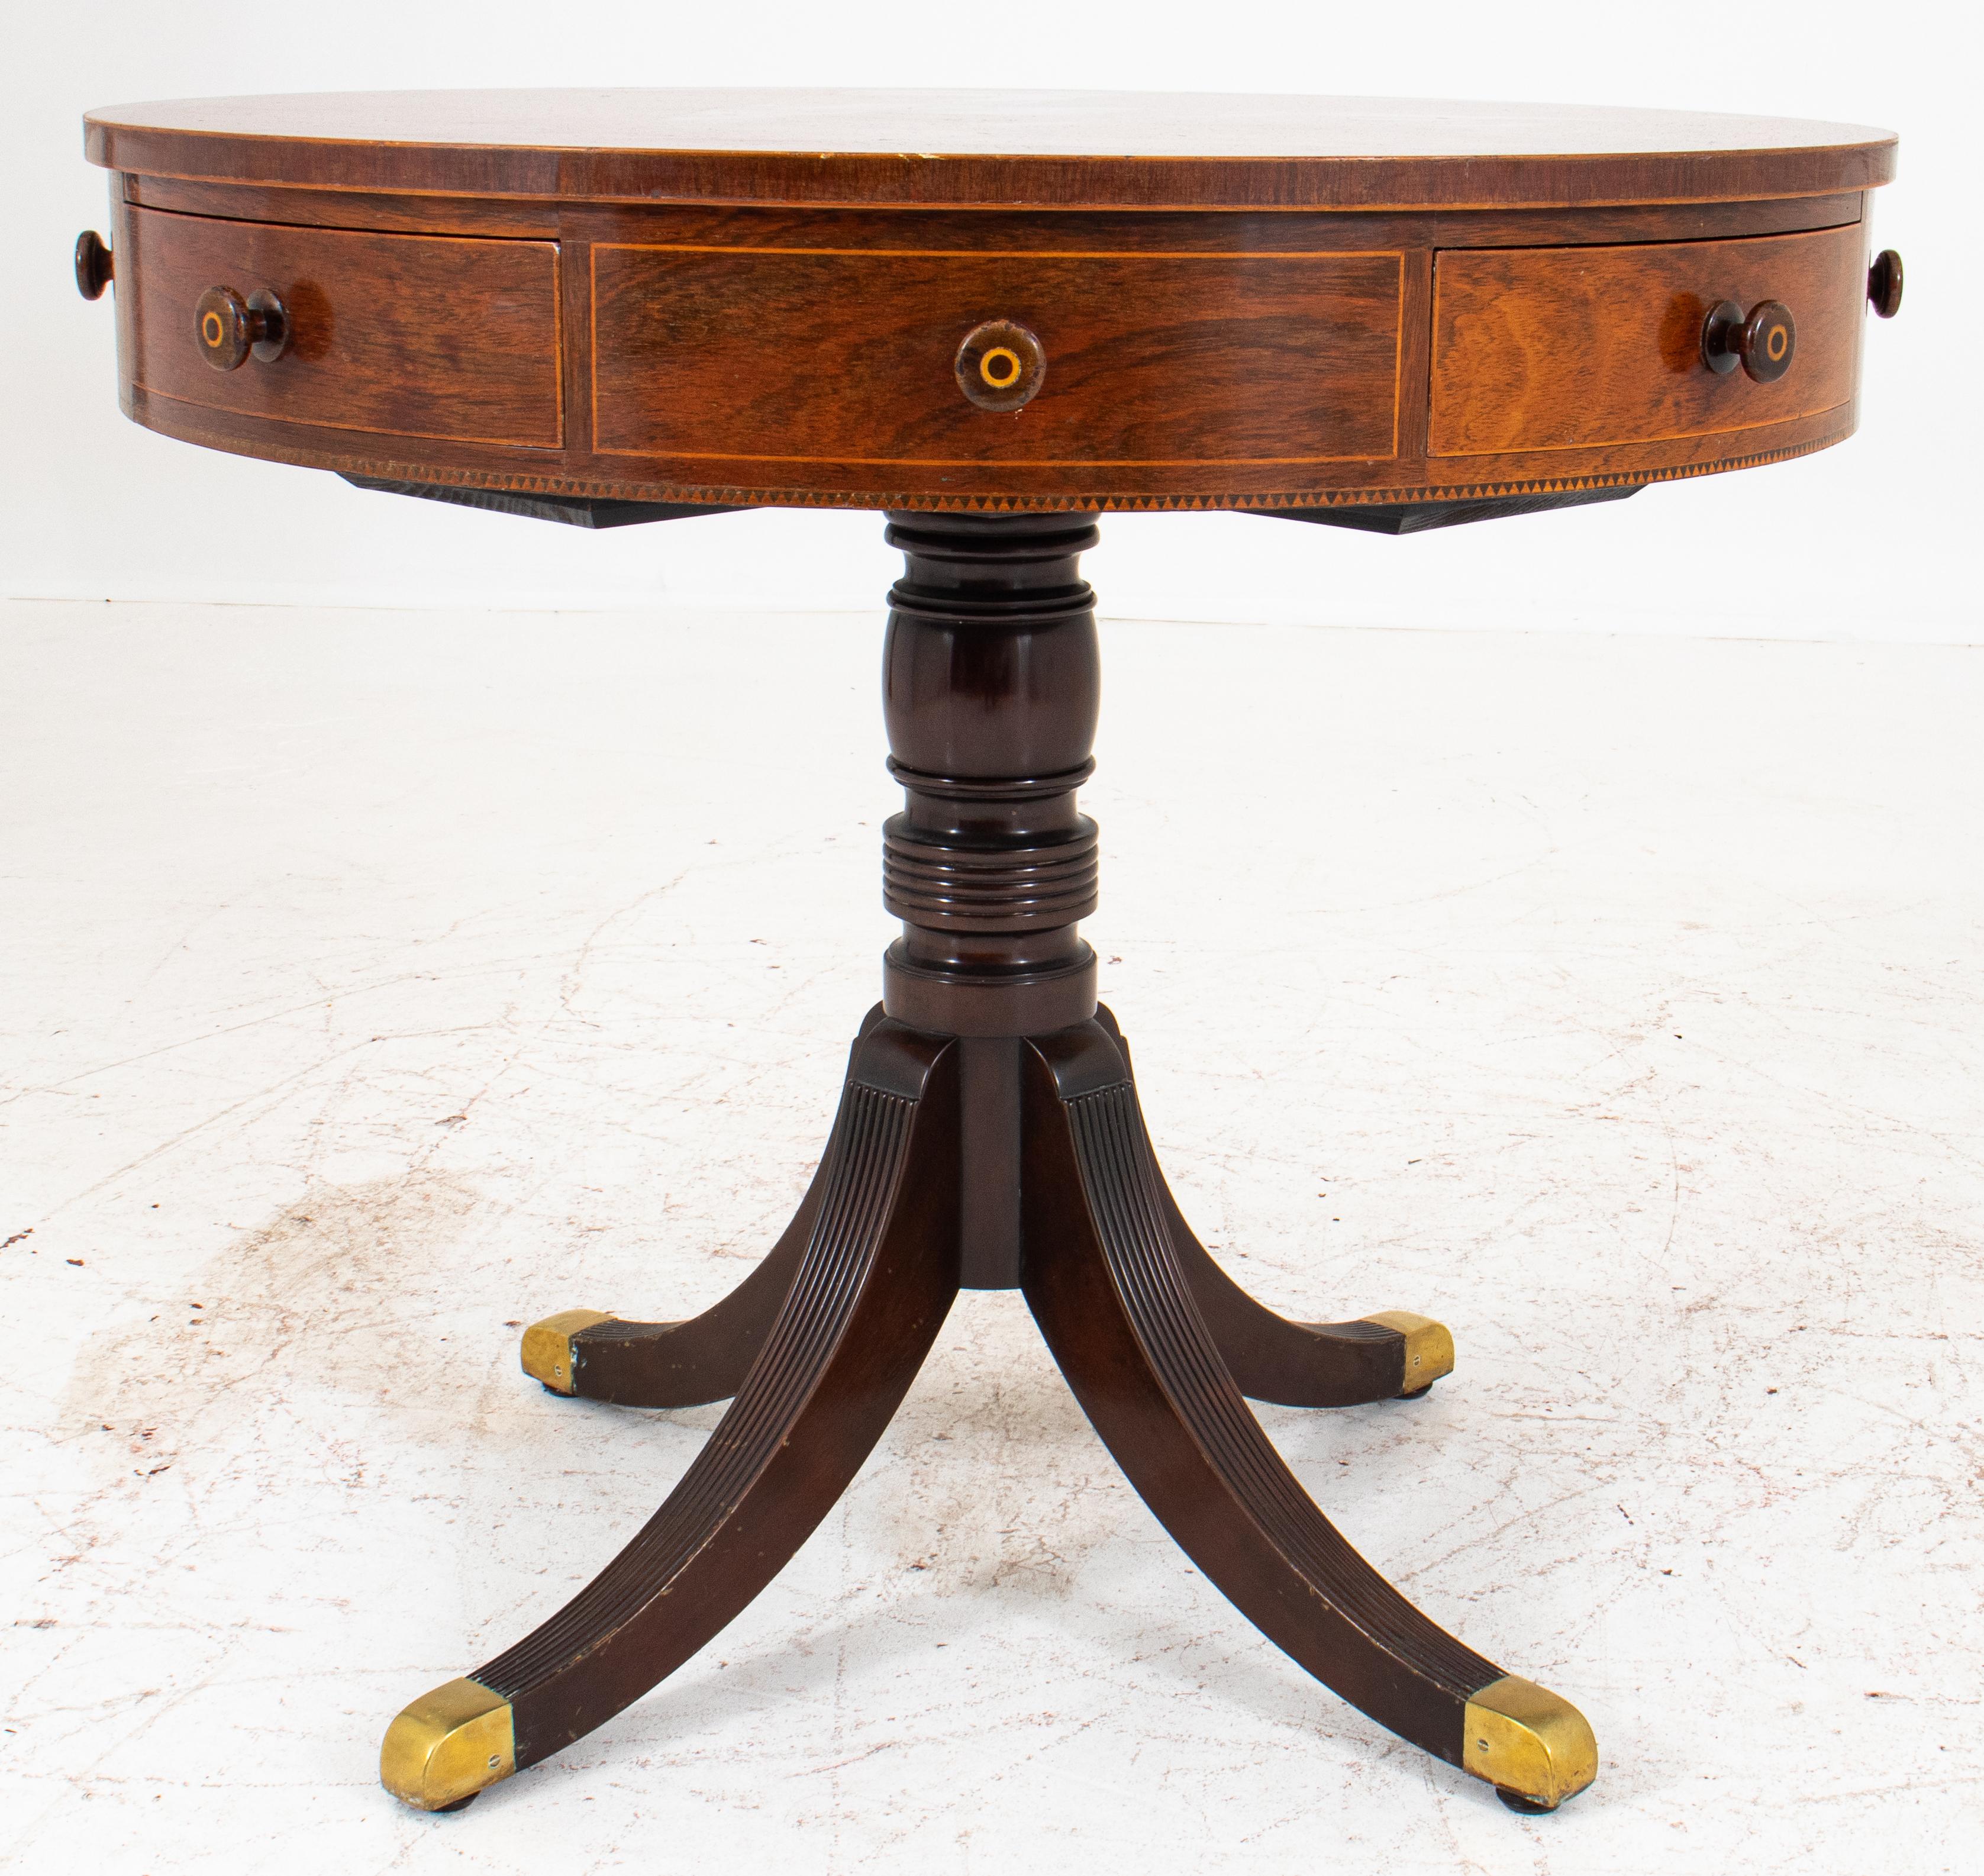 20th Century Regency Style Mahogany Rent or Drum Table